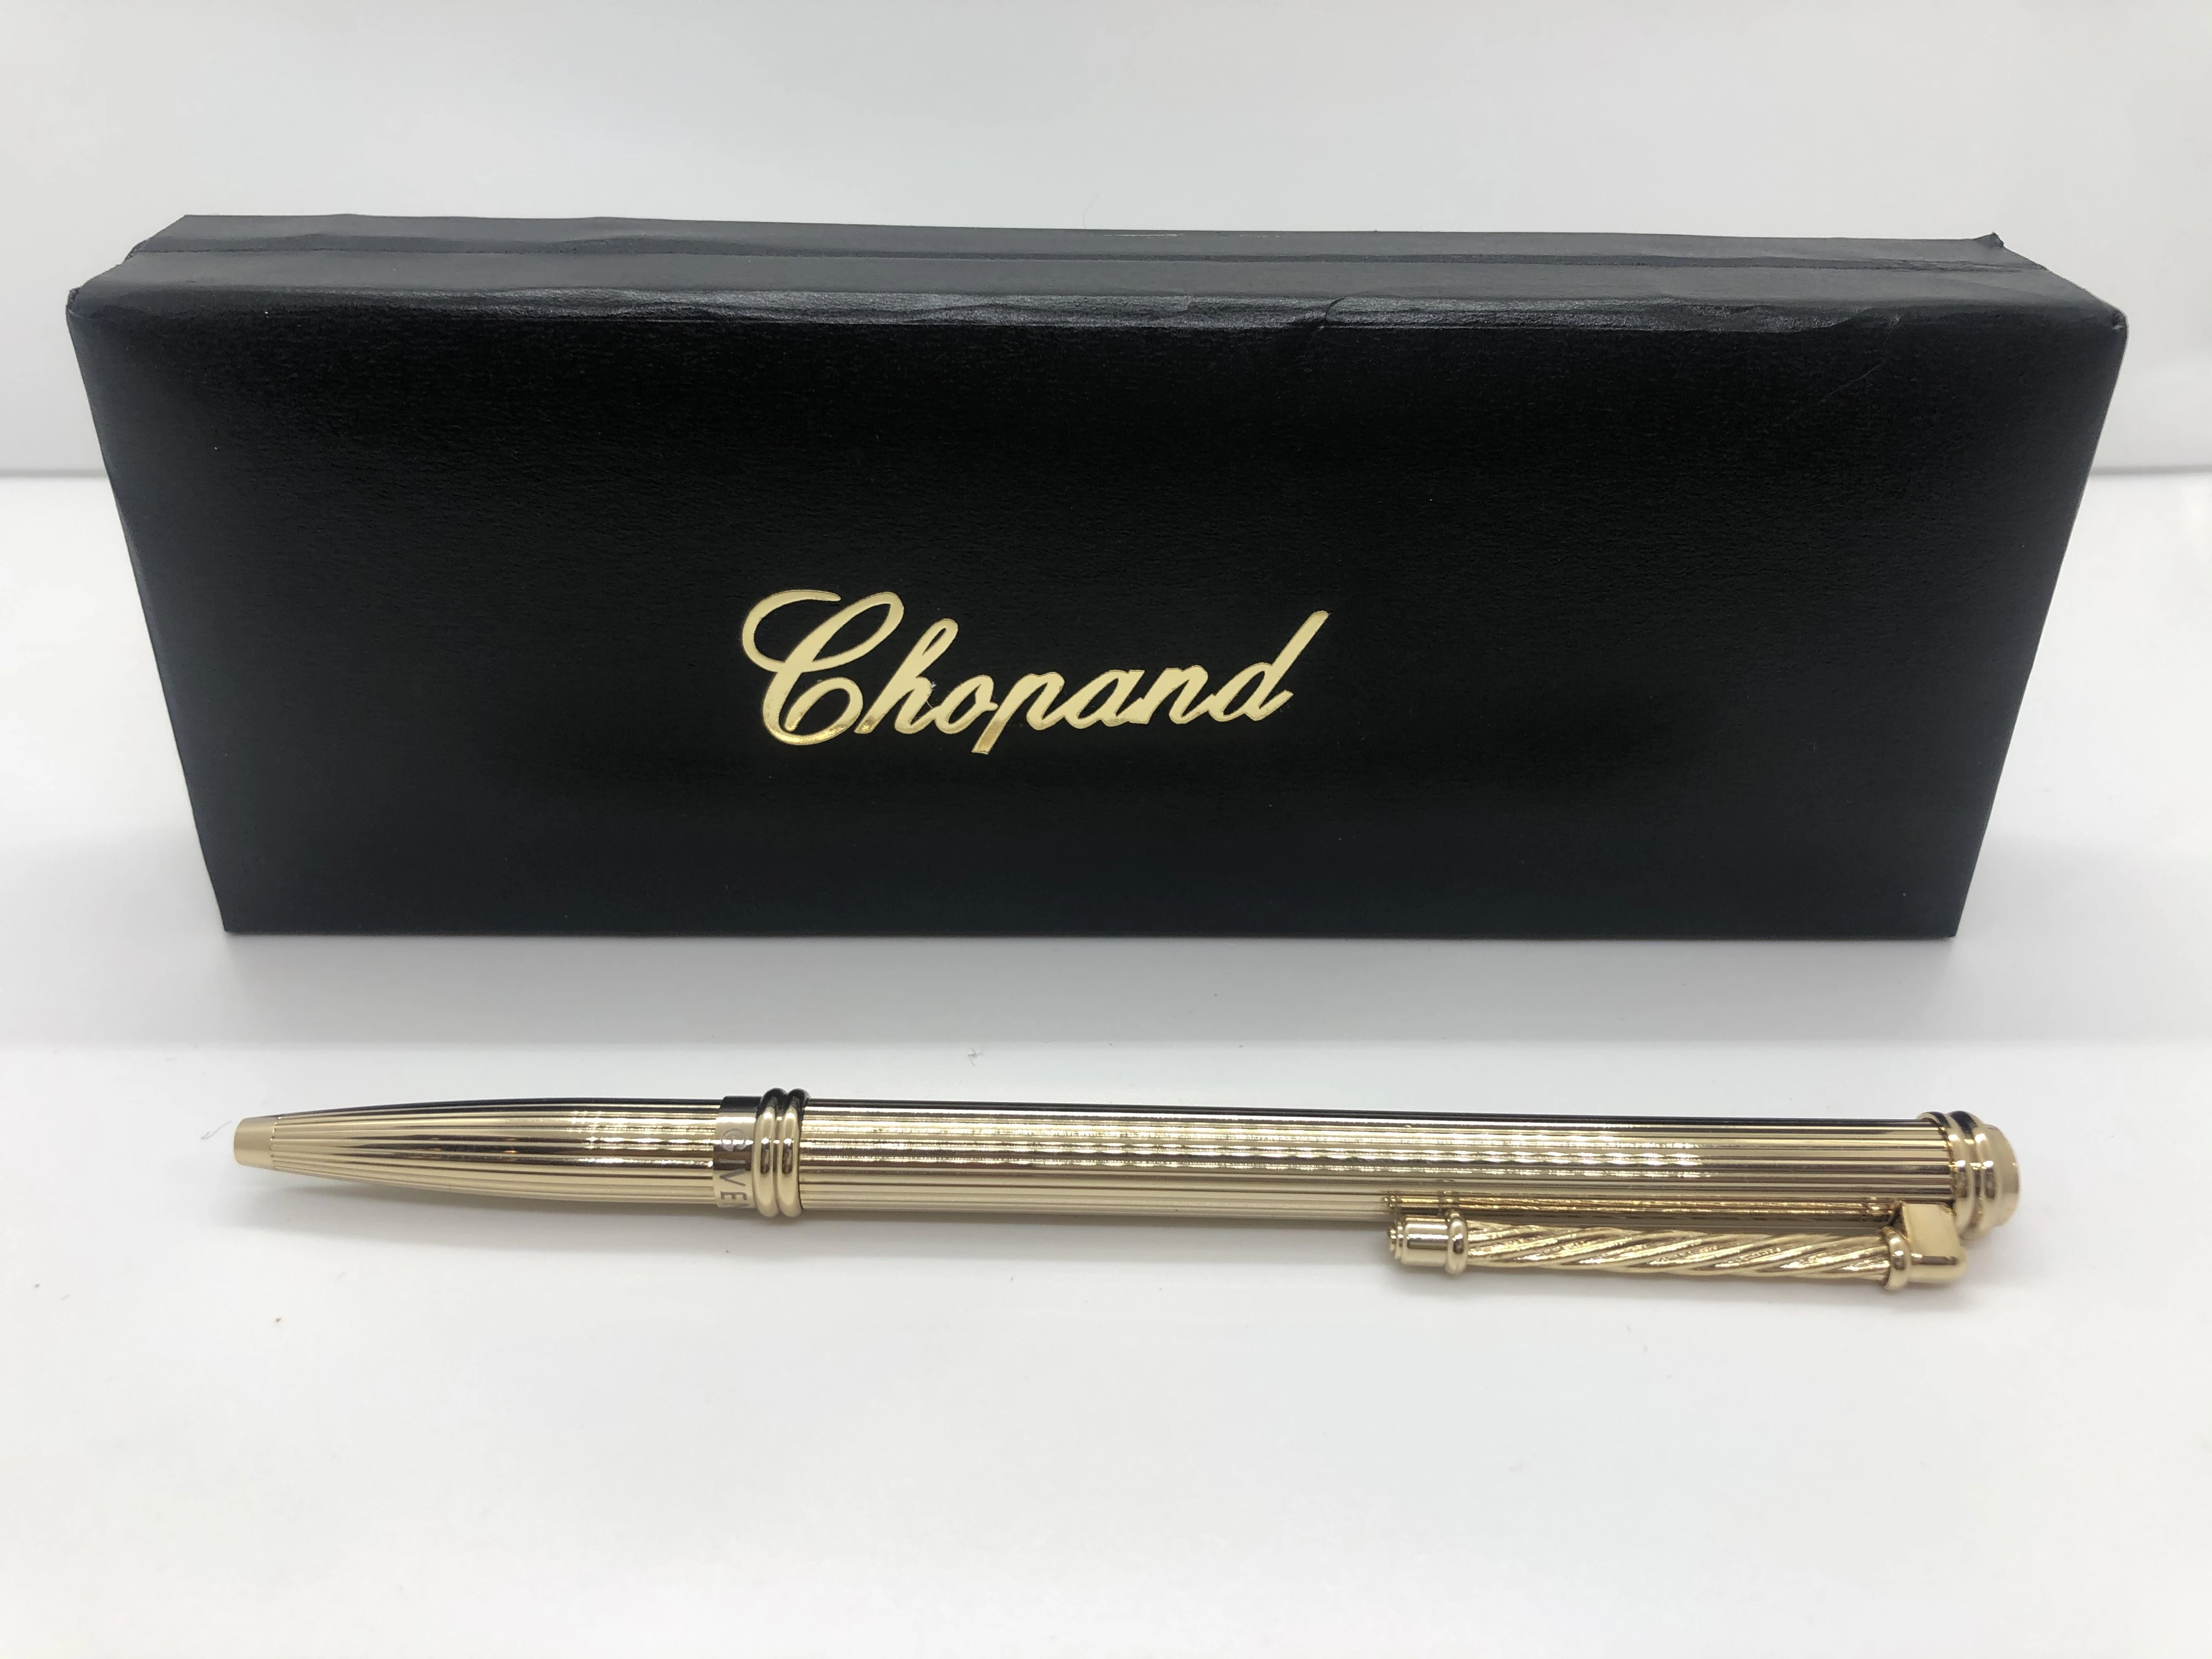 A gold Chopard pen - with embossed touches - with the brand's logo on the top and engraved in the rotation